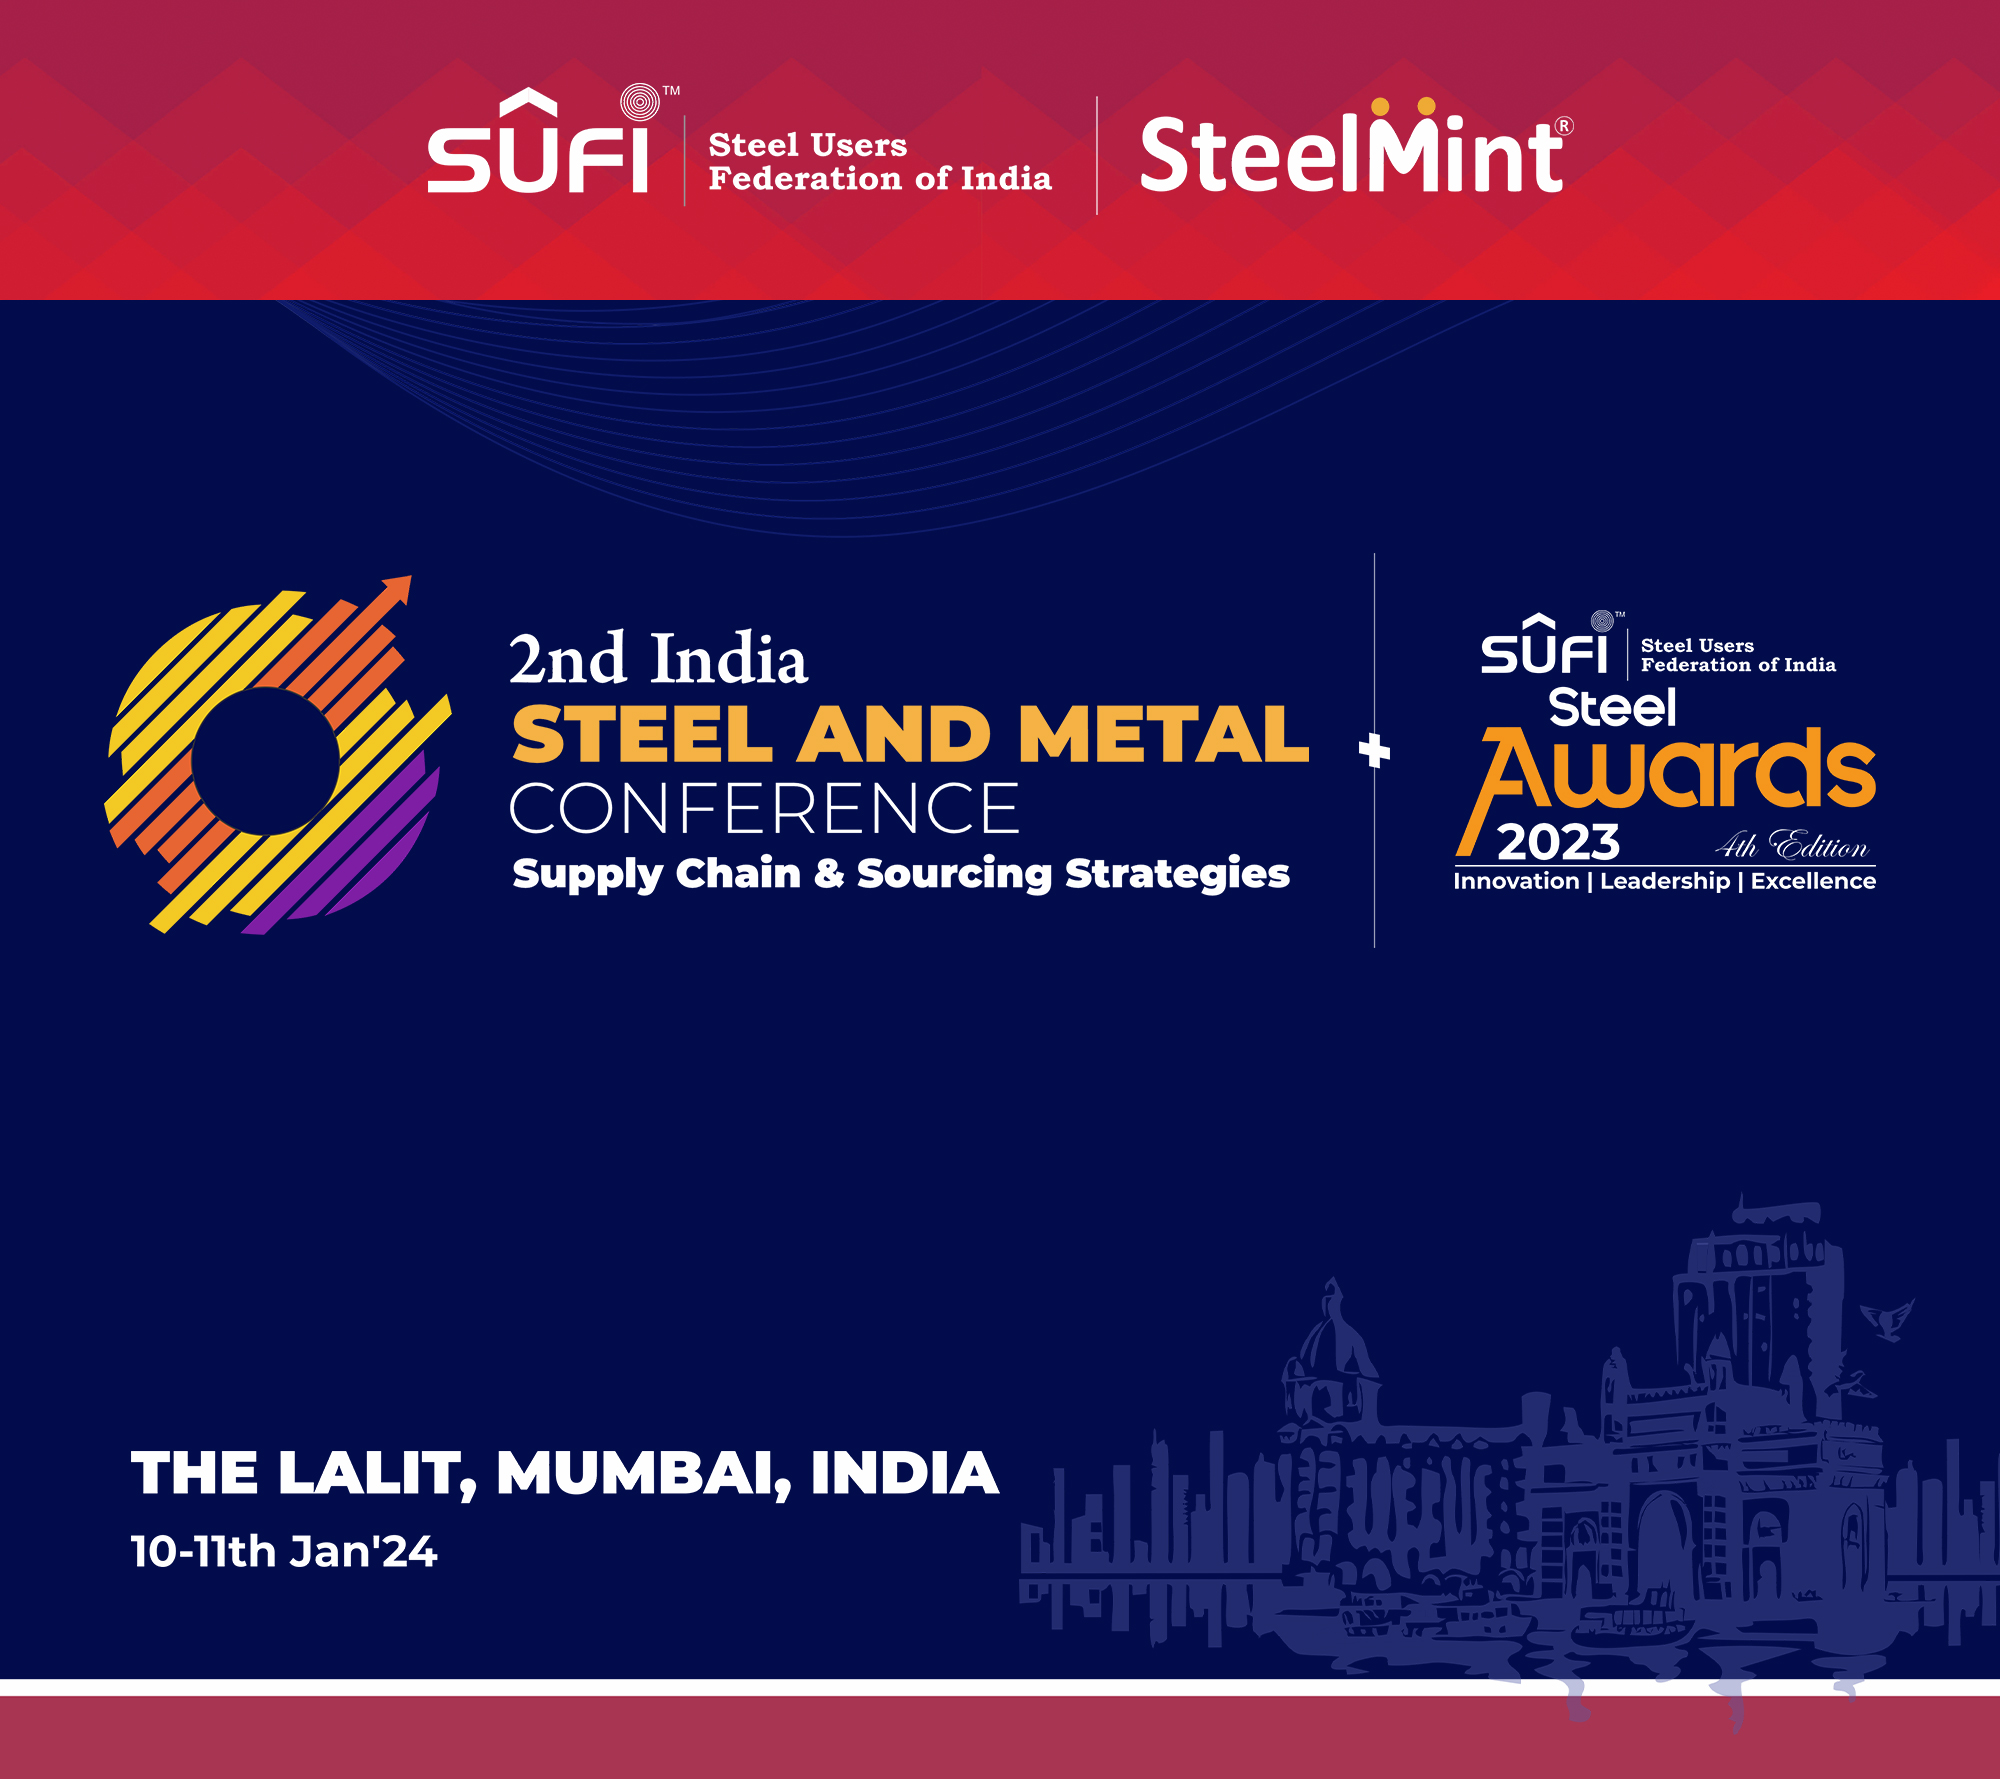 2nd India Steel And Metal Conference: Supply Chain & Sourcing Strategies, Mumbai, Maharashtra, India